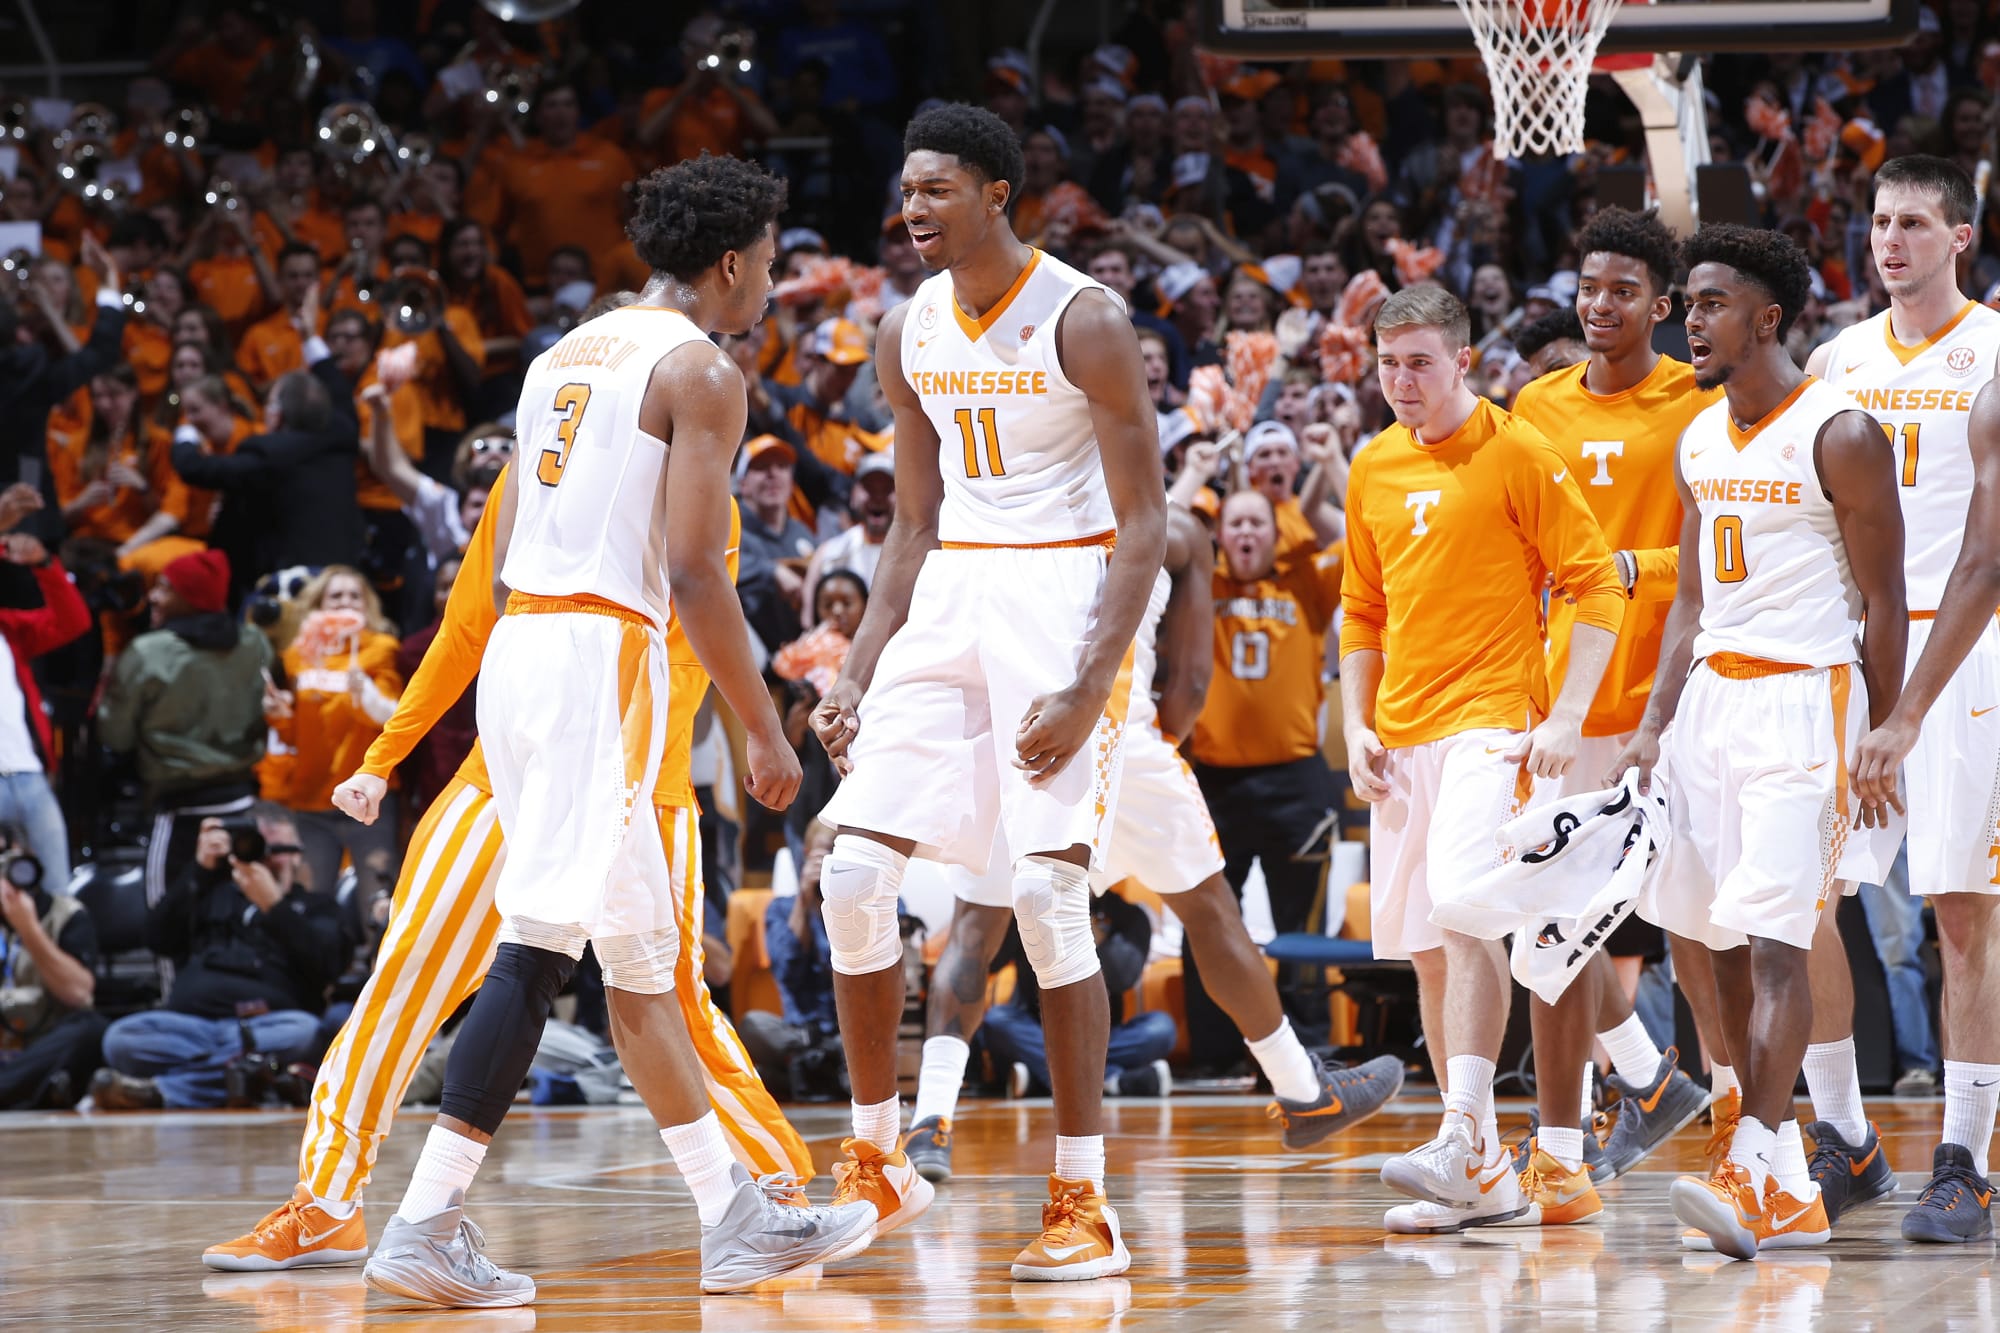 Tennessee basketball: 3 takeaways from Vols' 70-67 win vs. Gamecocks